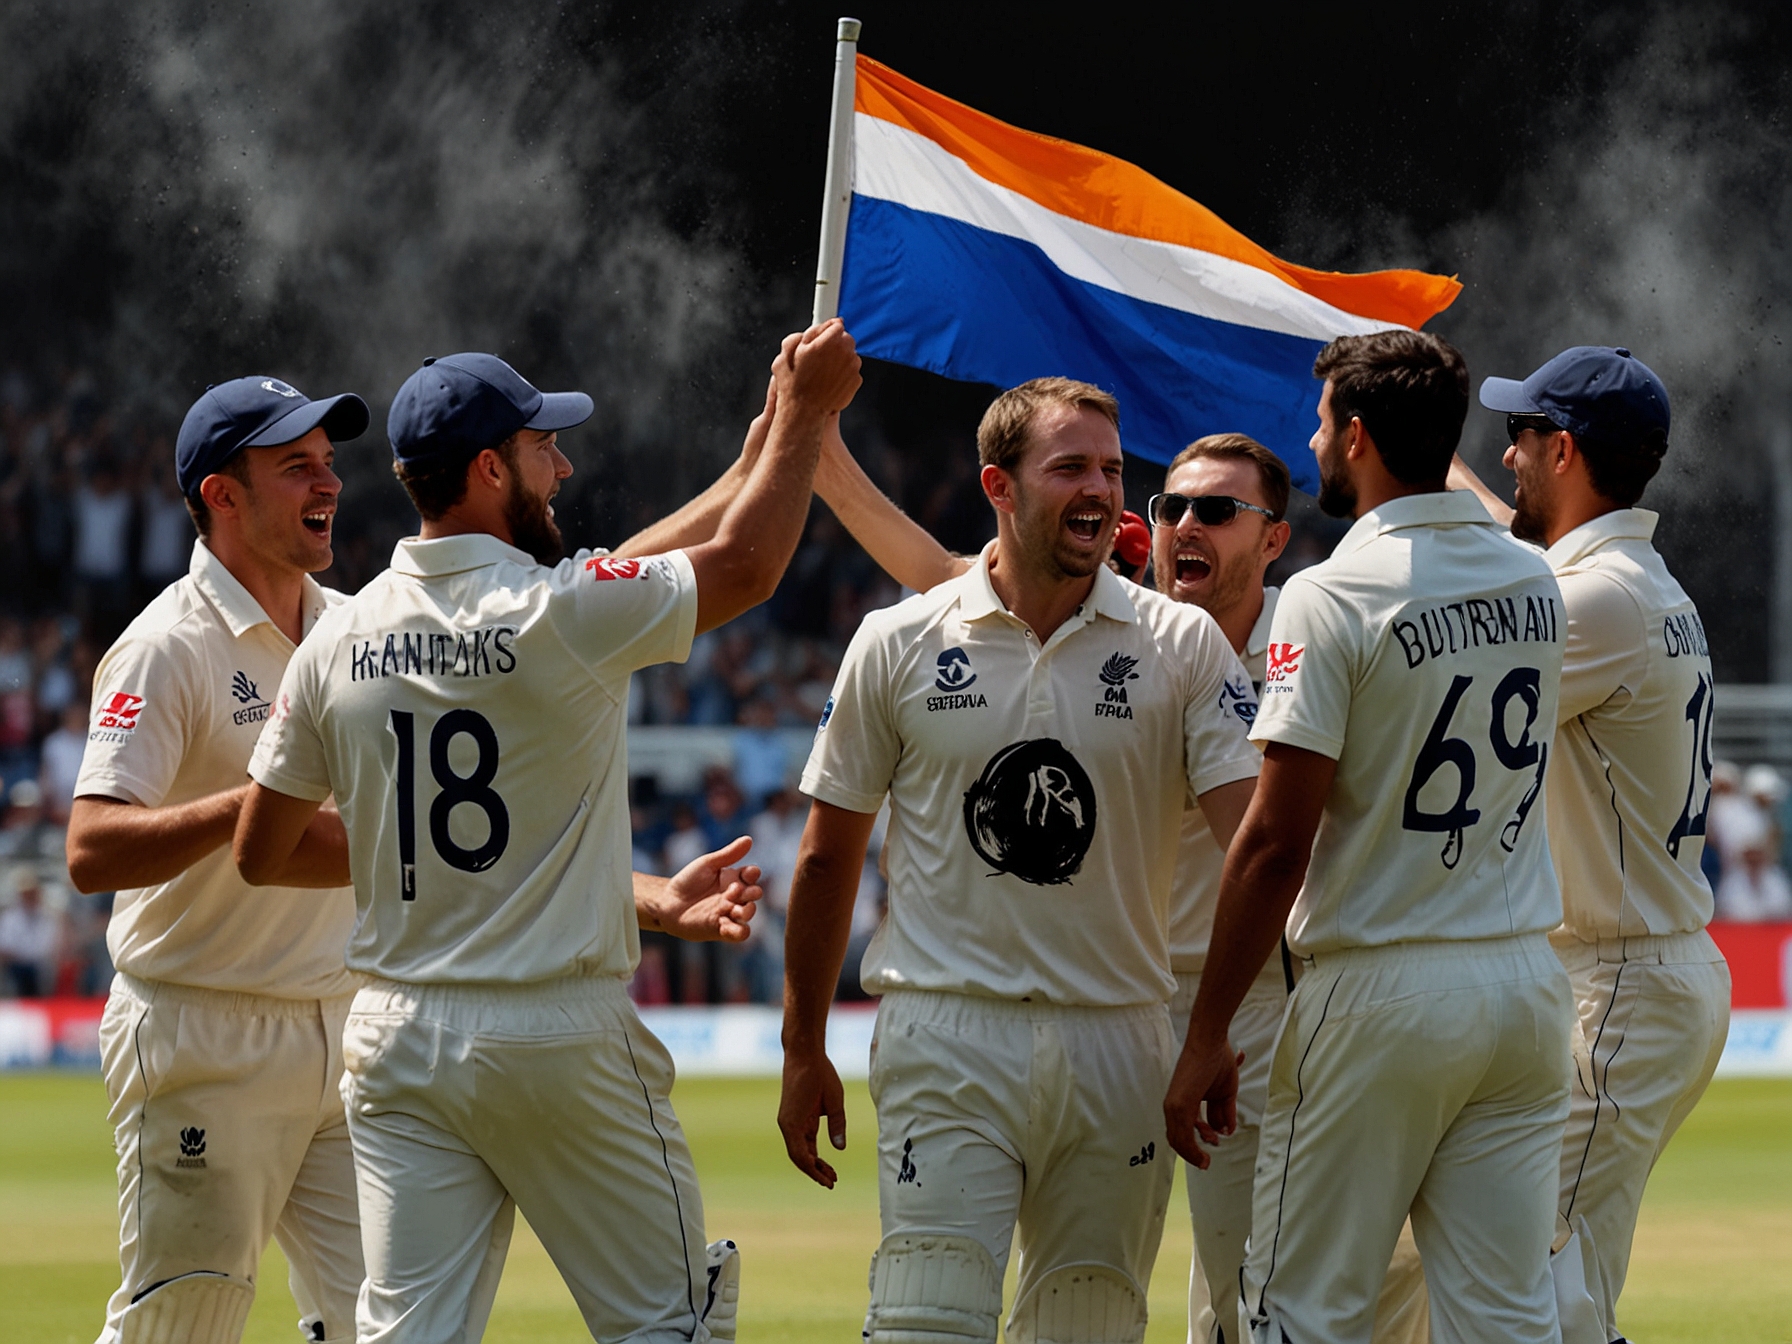 Estonian cricket team celebrating their decisive victory, crediting Sahil Chauhan's incredible century. The atmosphere is electric, highlighting the team's unity and Chauhan's influence.